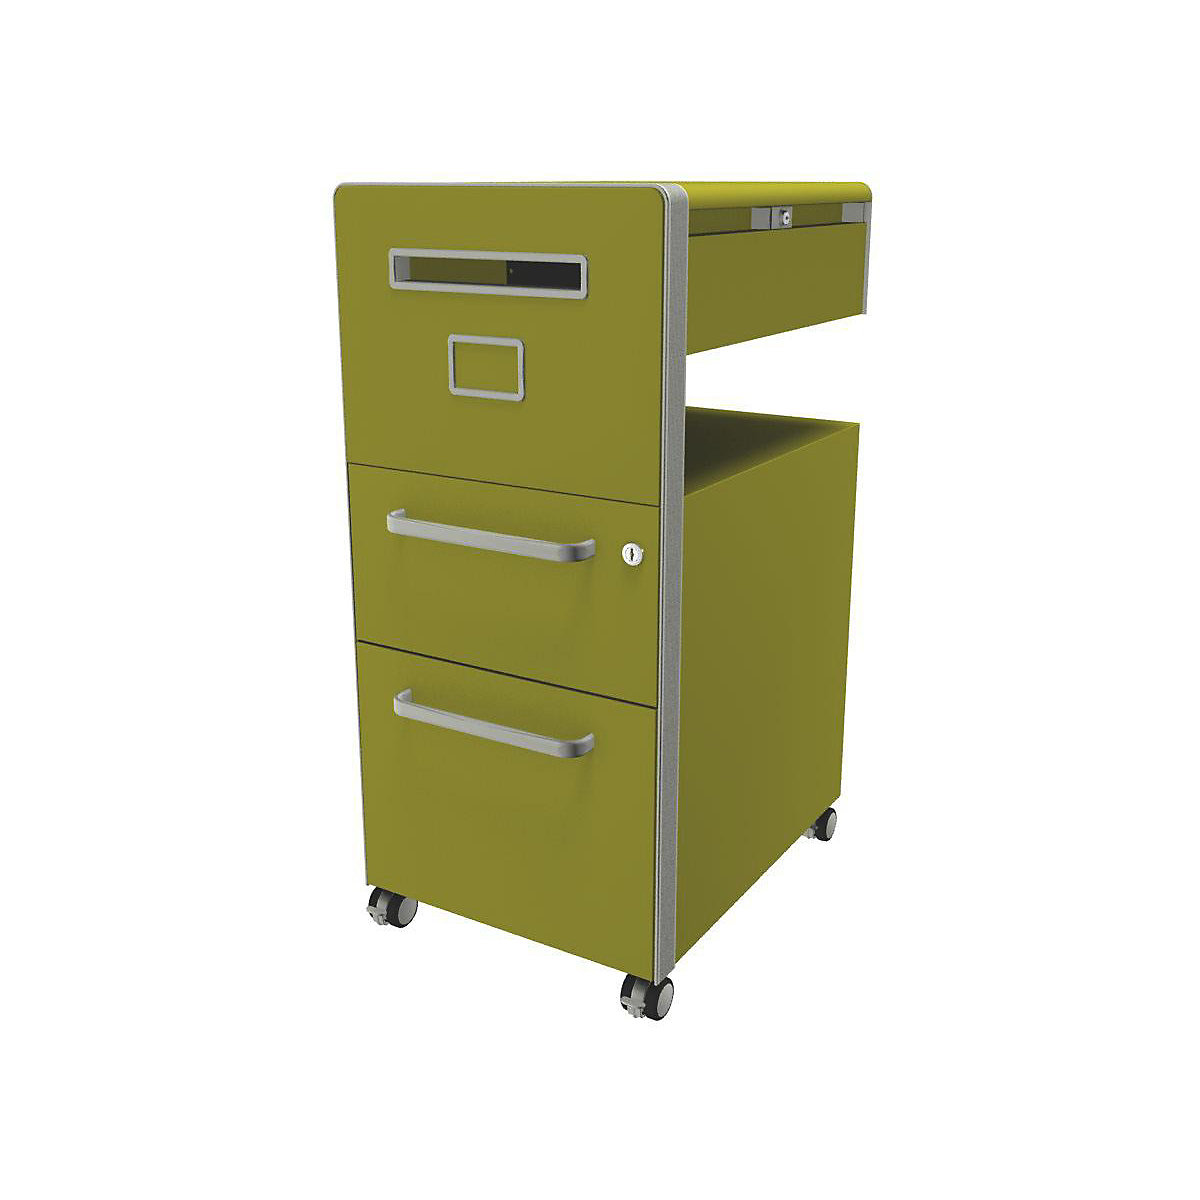 Bite™ pedestal furniture, with 1 pin board, opens on the left side – BISLEY, with 1 universal drawer, 1 suspension file drawer, tickleweed-27